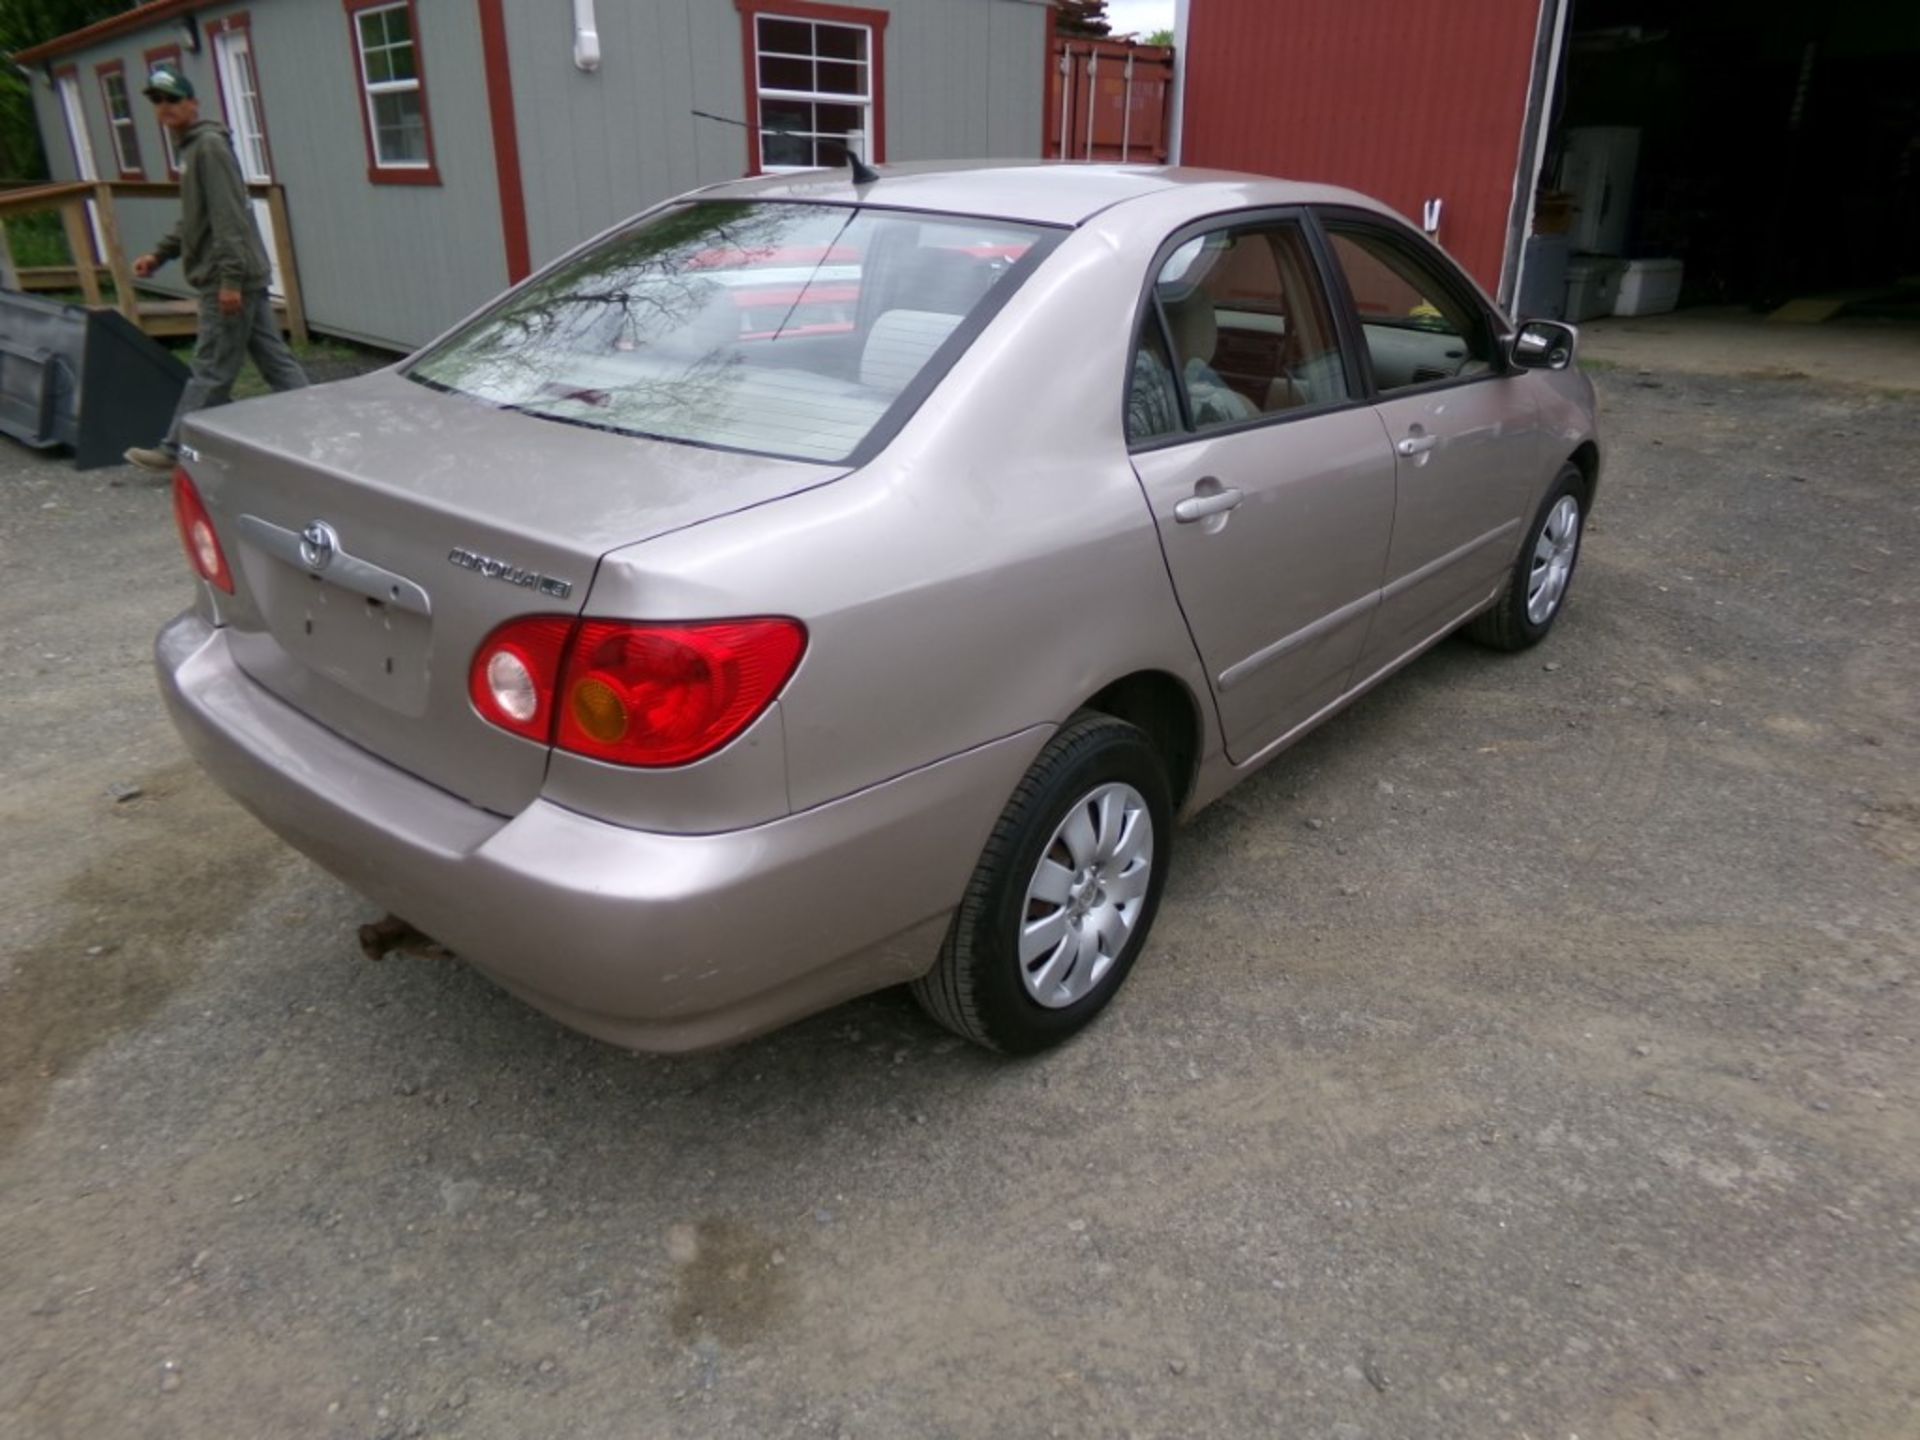 2003 Toyota Corolla, Tan, Auto Trans, TMU Miles - ODOMETER DOES NOT DISPLAY, VIN#: 2T1BR38E93C148691 - Image 3 of 6